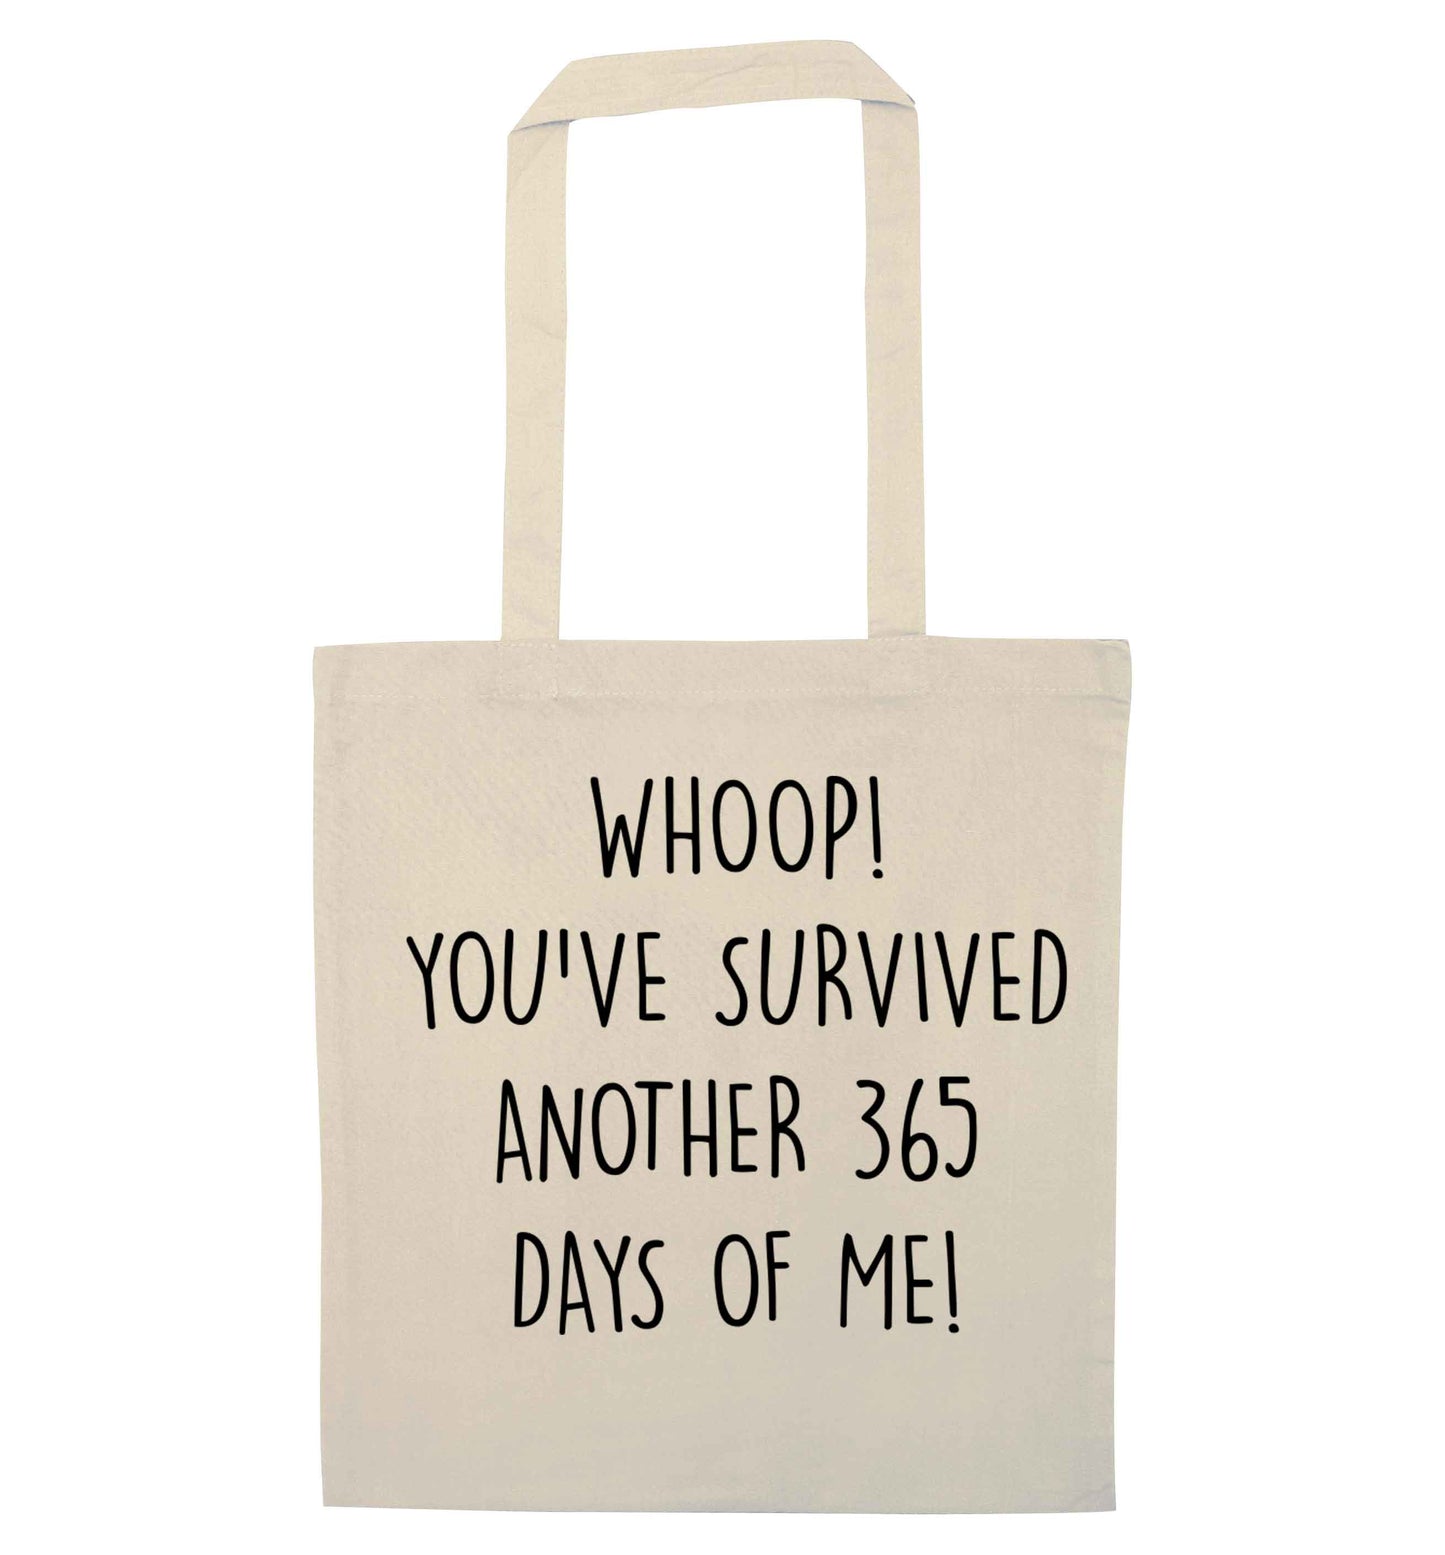 Whoop! You've survived another 365 days with me! natural tote bag